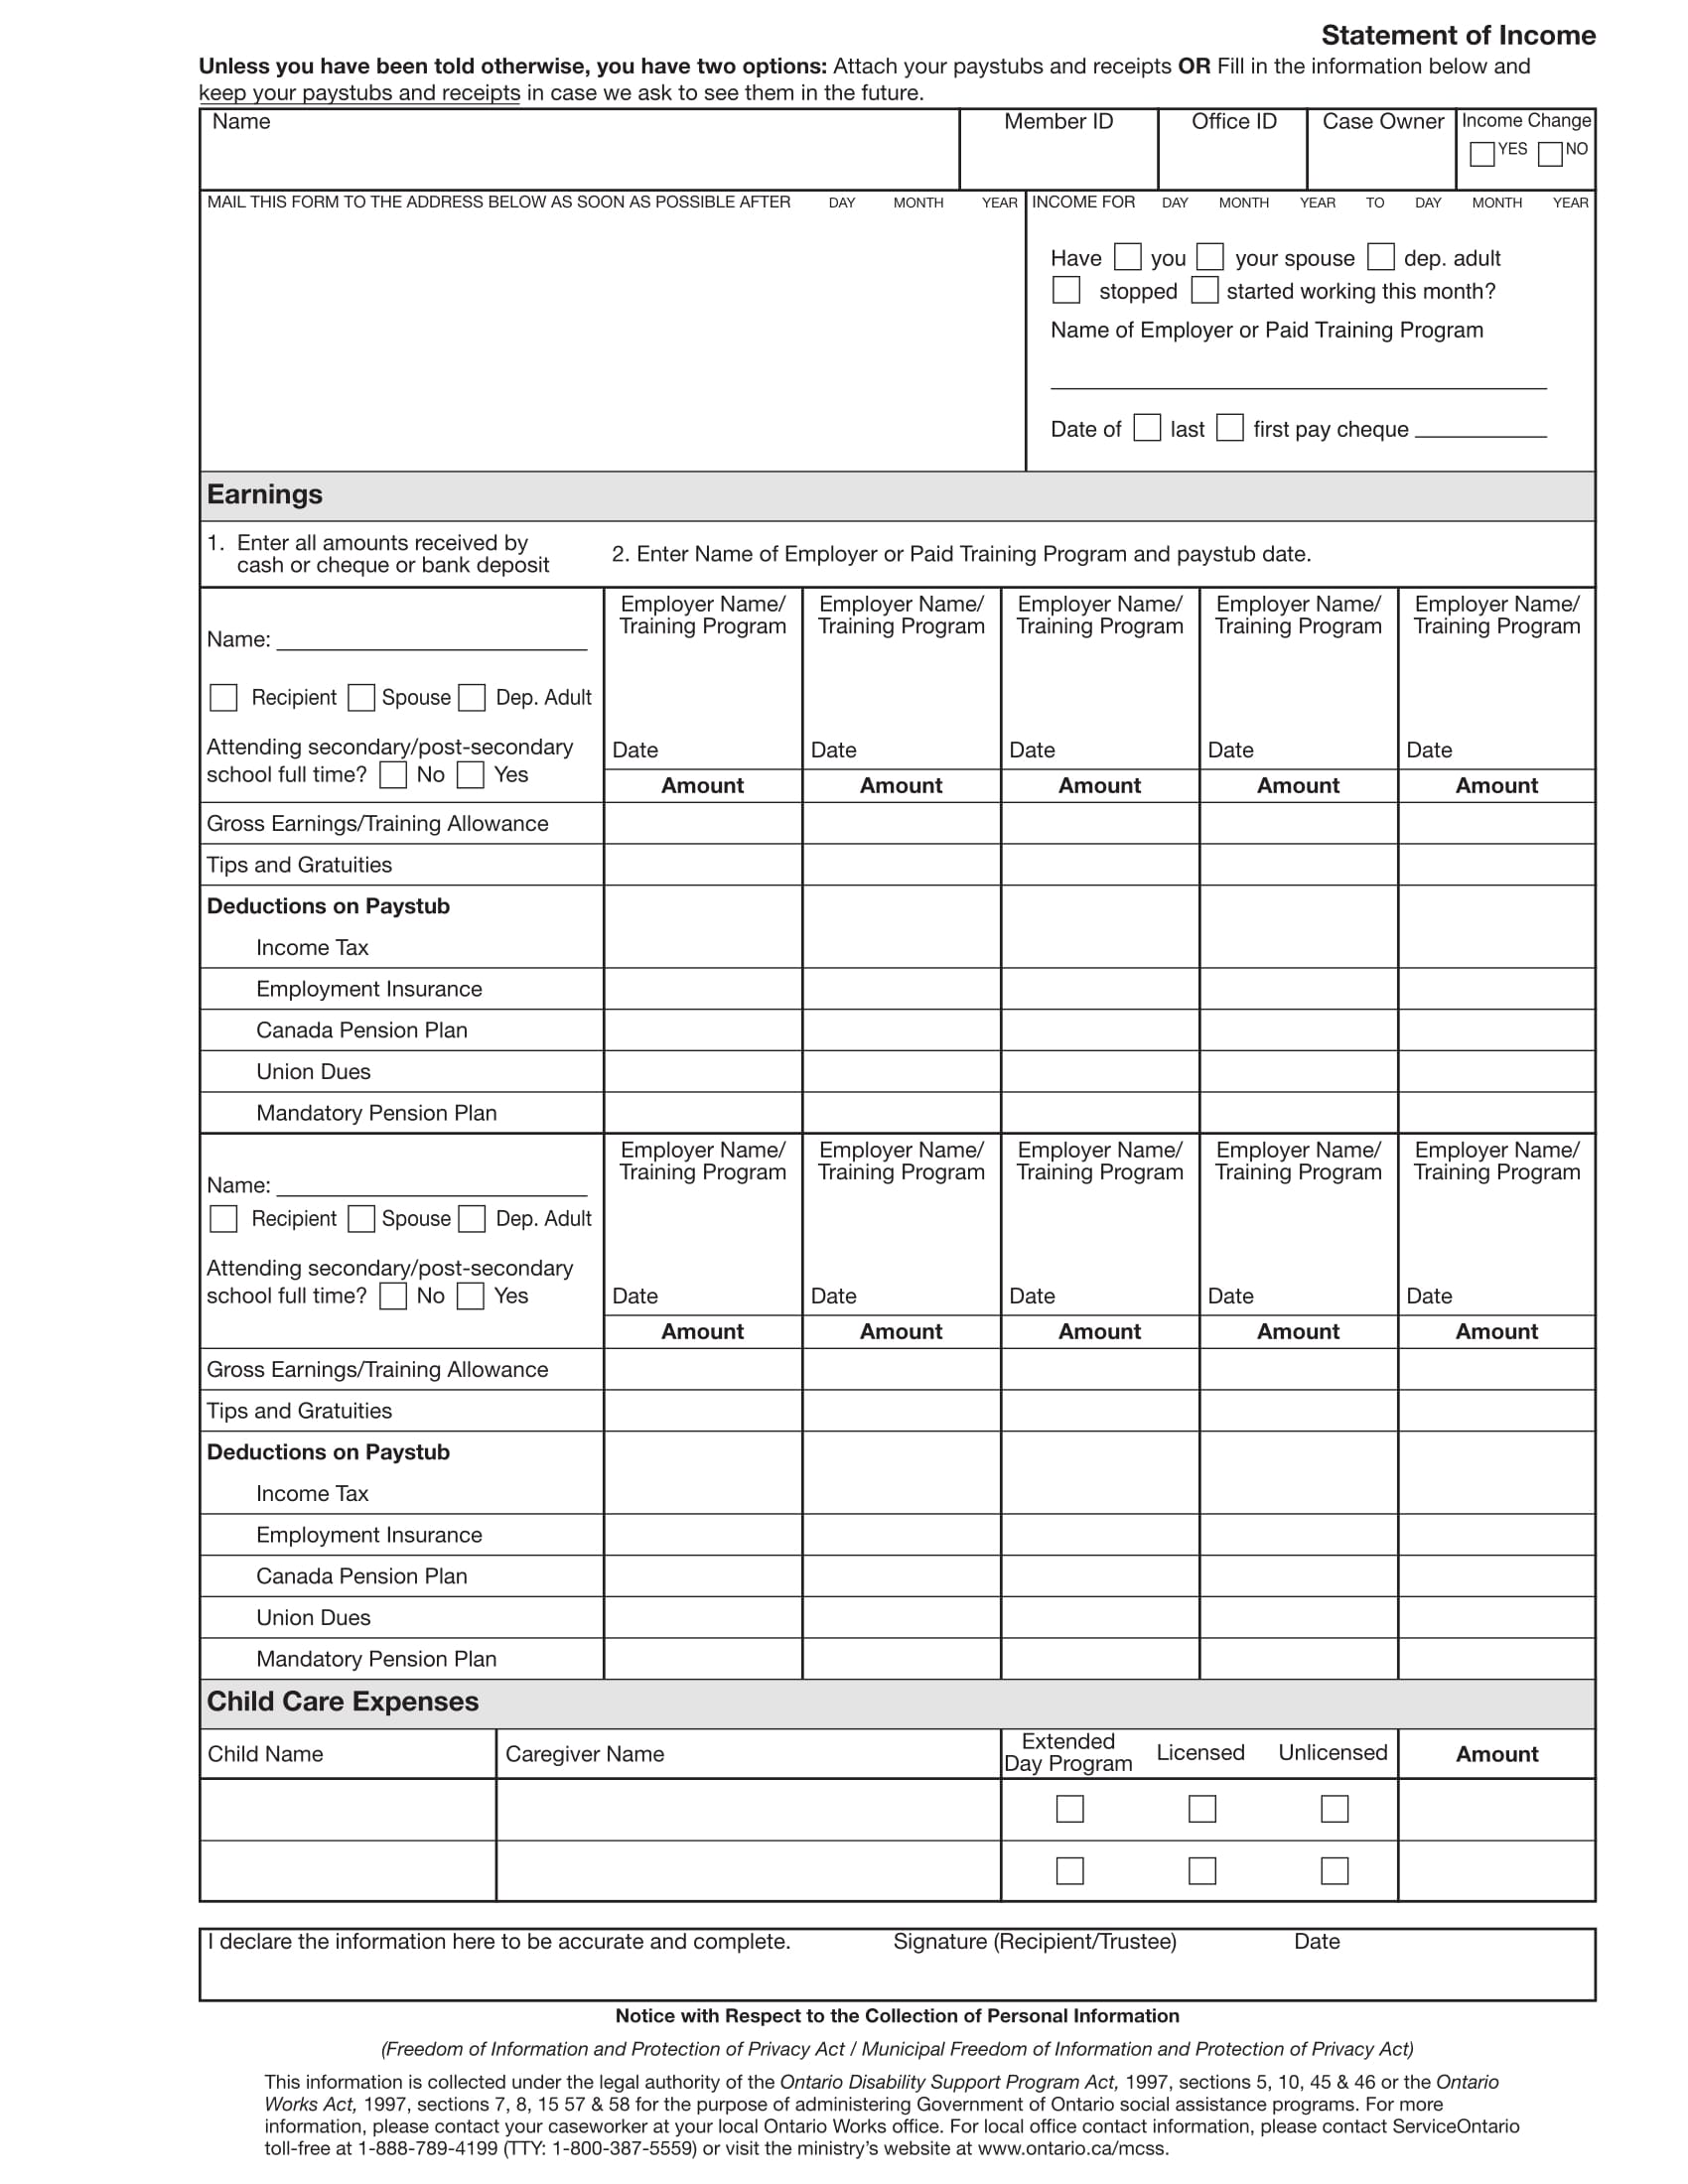 childcare expenses income statement form 1